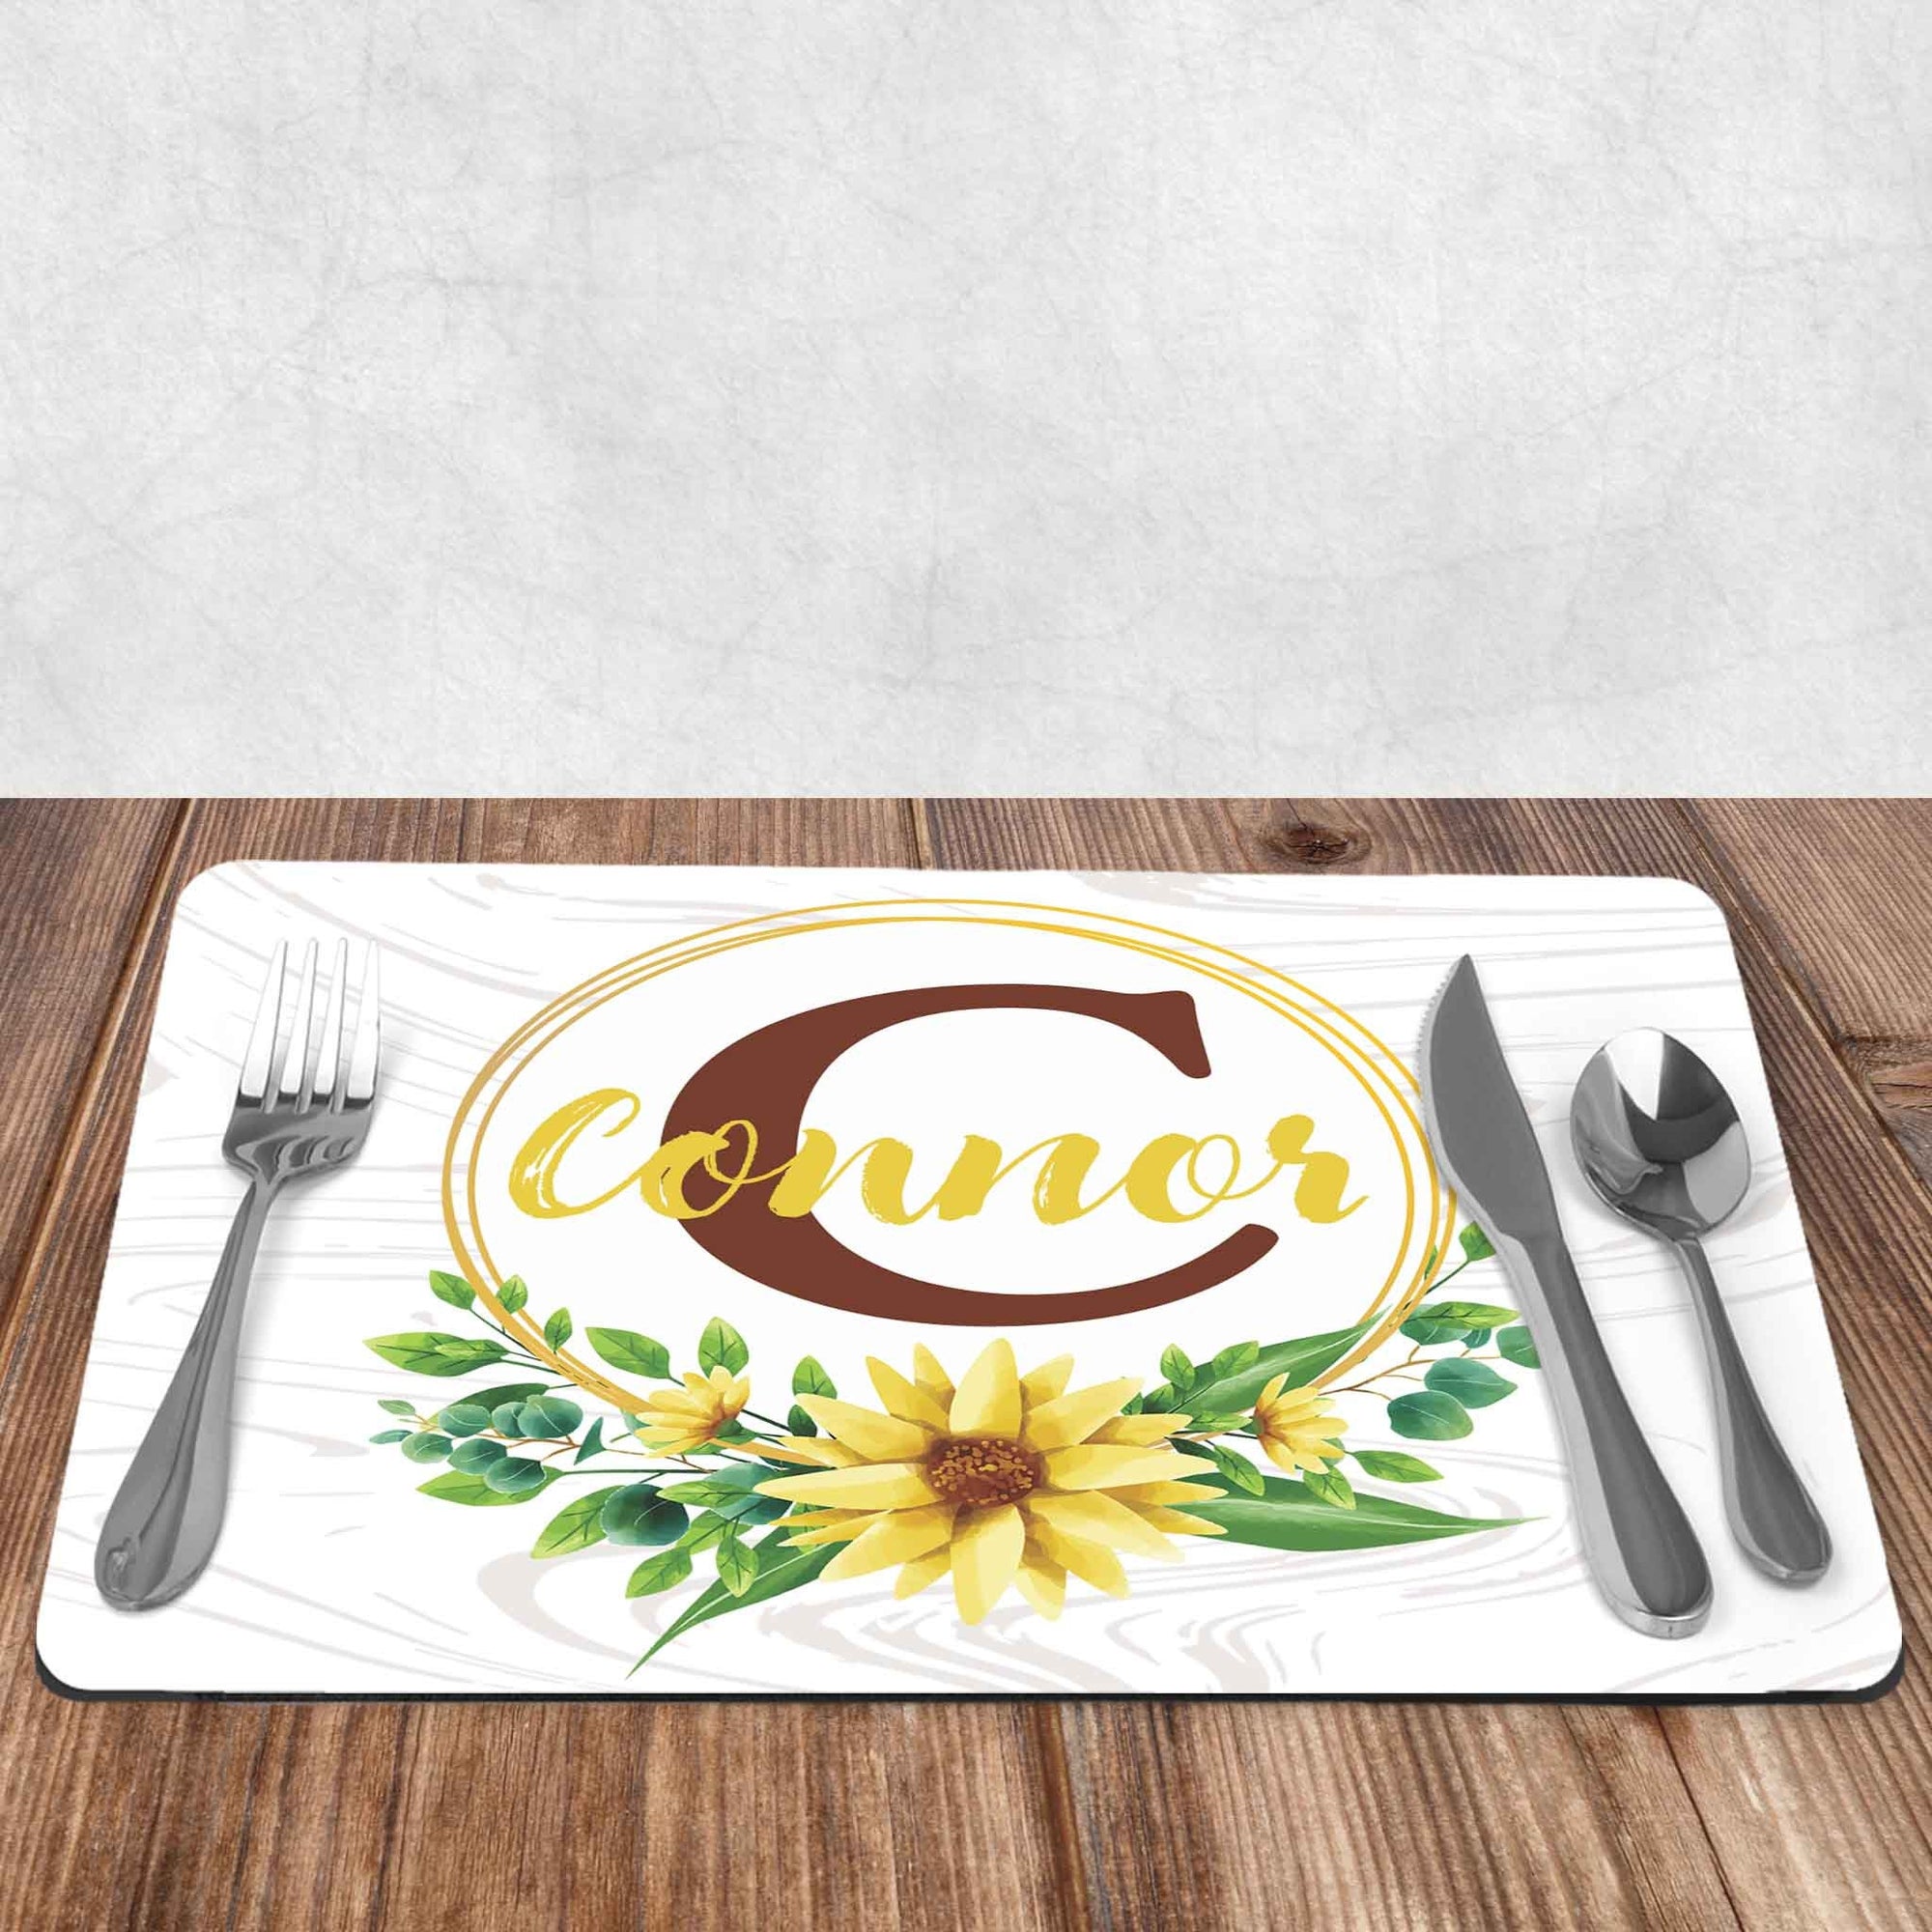 Custom Placemats | Personalized Dining and Serving | Sunflower Monogram